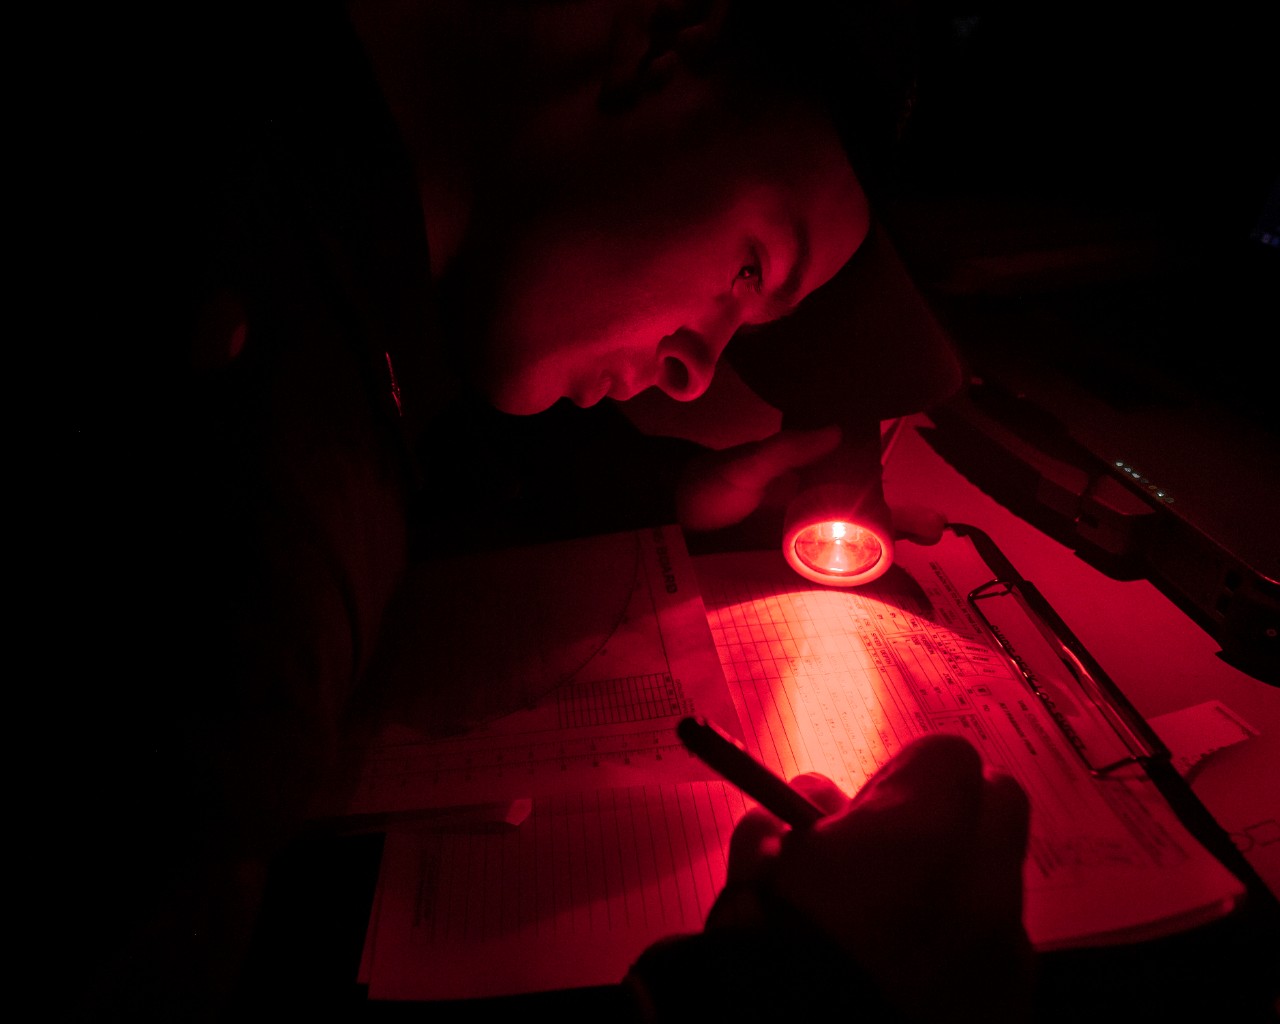 <p>PHILIPPINE SEA (Dec. 31, 2019) Quartermaster 3rd Class Luke Farley, from Springfield, Ill., writes the New Year deck log entry on the bridge of the Ticonderoga-class guided-missile cruiser USS Chancellorsville (CG 62). Chancellorsville is forward-deployed to the U.S. 7th Fleet area of operations in support of security and stability in the Indo-Pacific region. (U.S. Navy photo by Mass Communication Specialist 1st Class Jeremy Graham)</p>